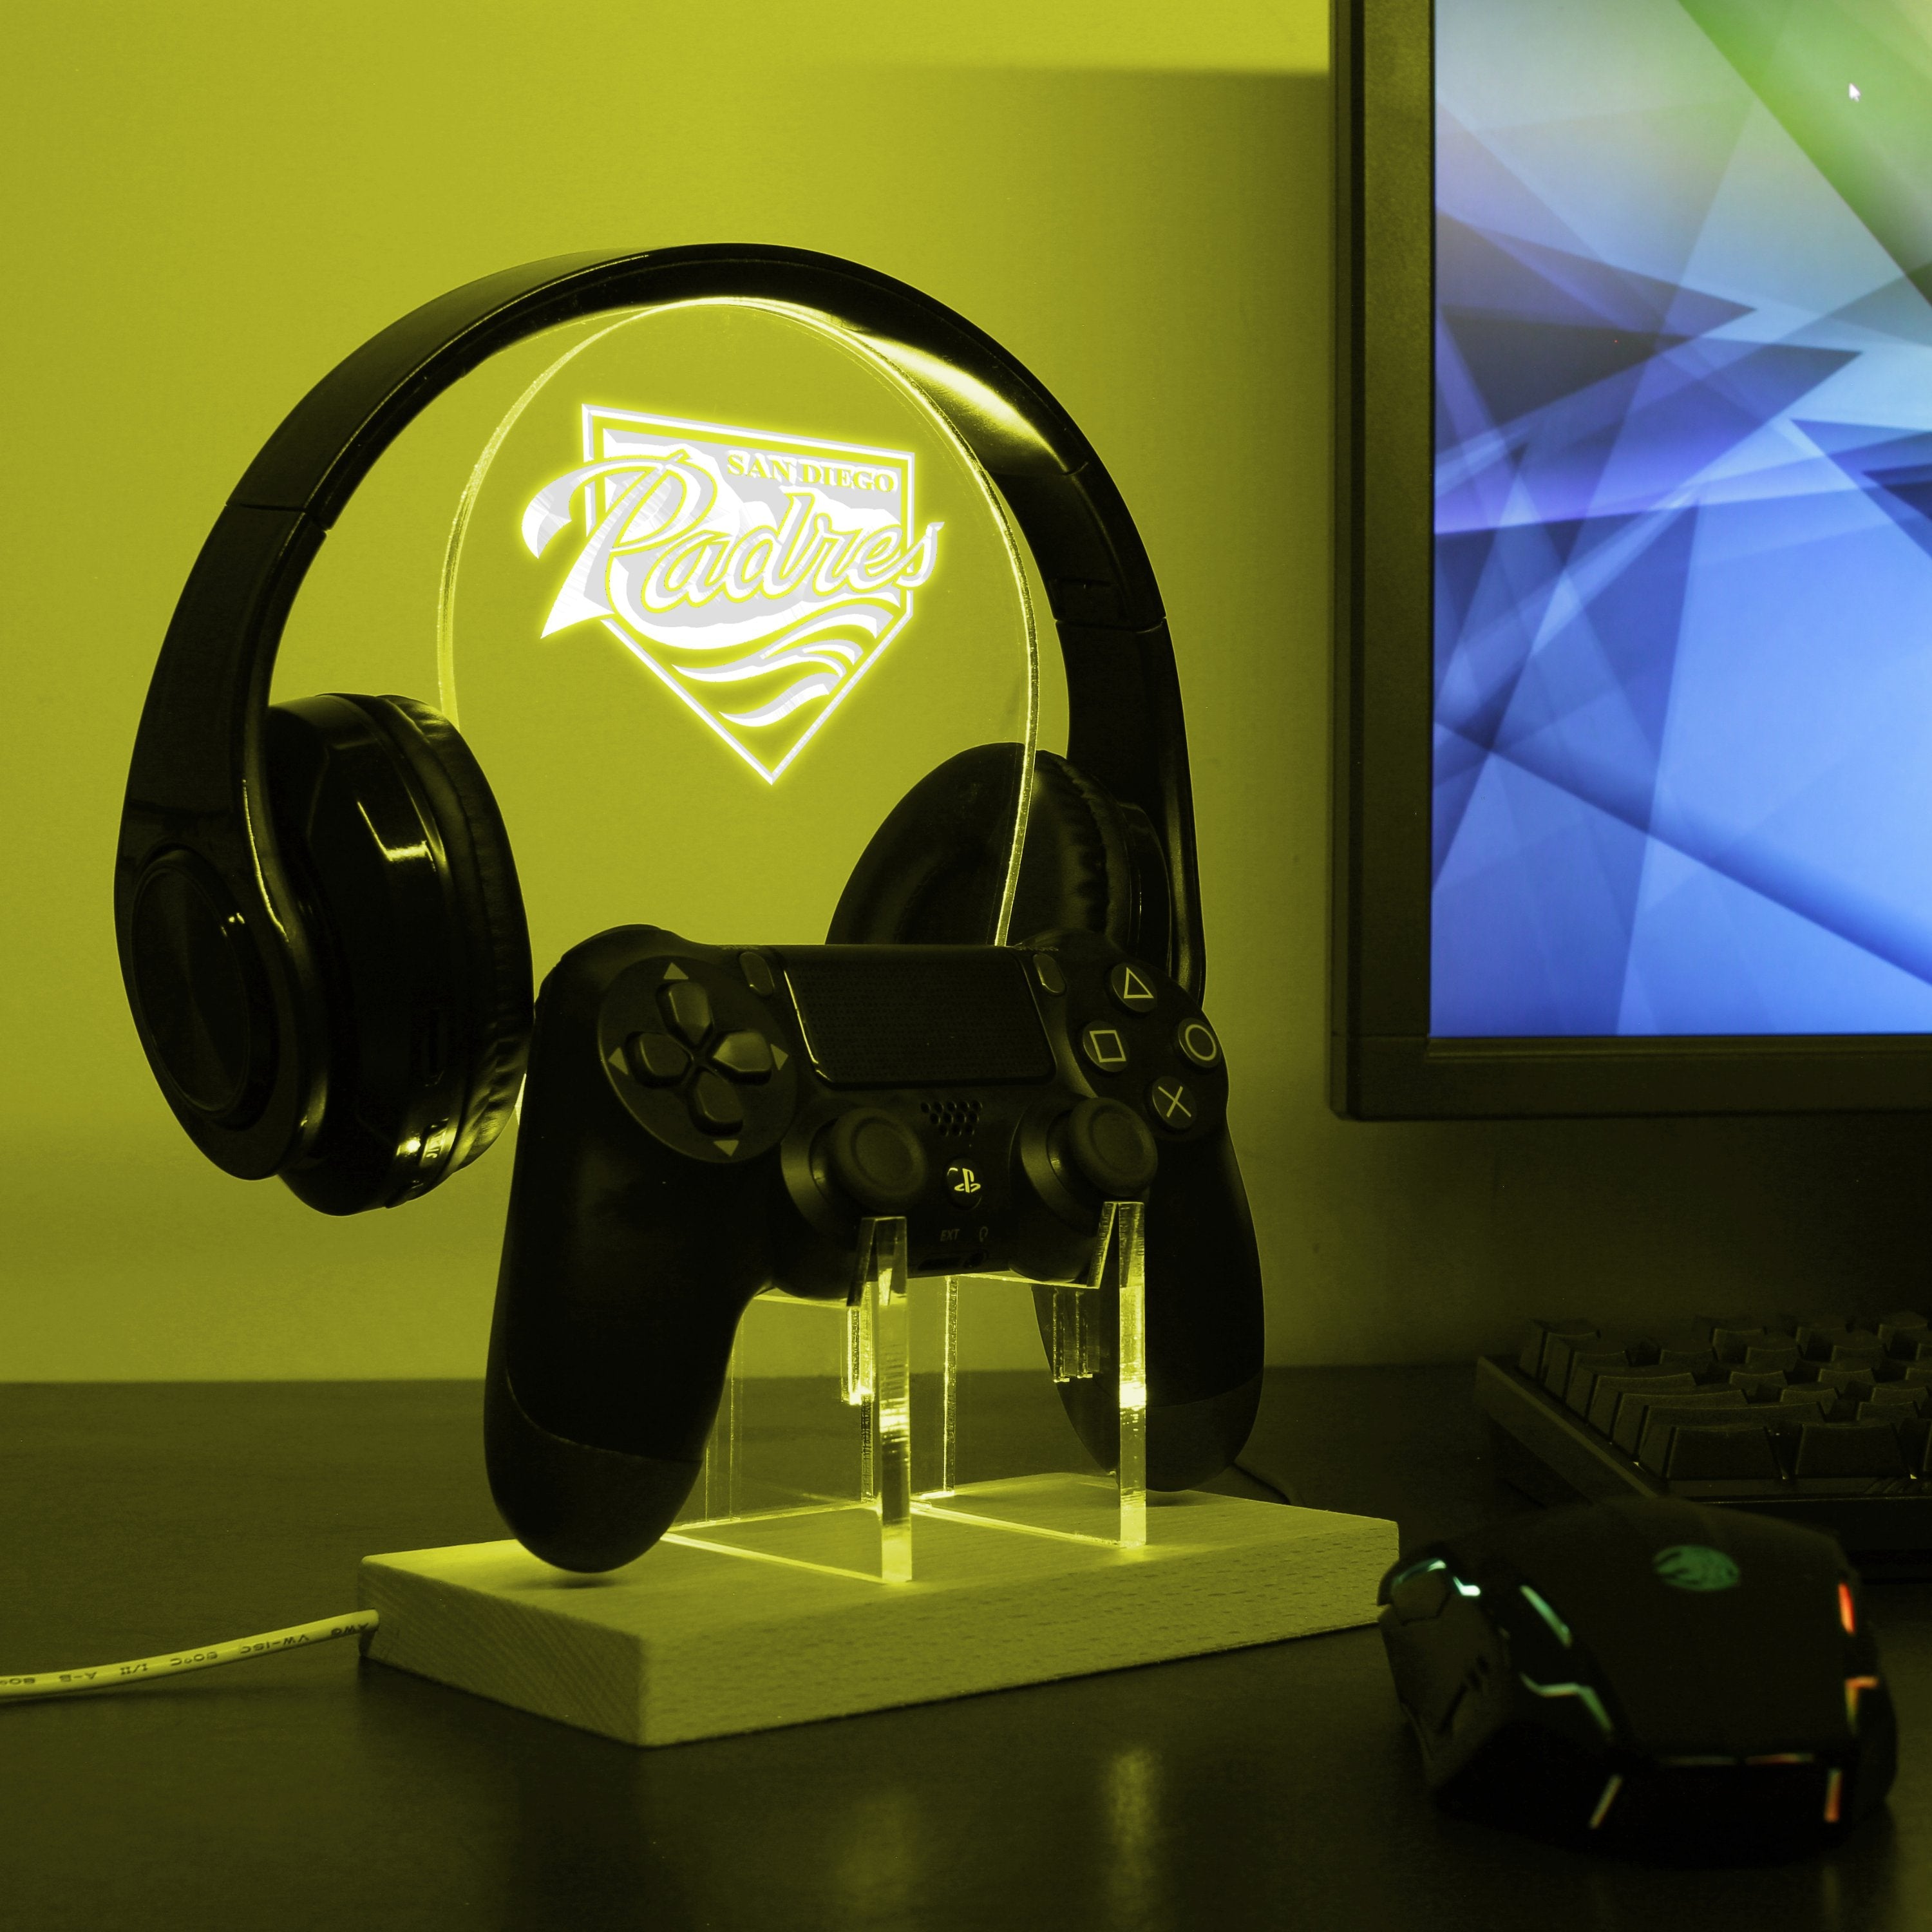 San Diego Padres LED Gaming Headset Controller Stand